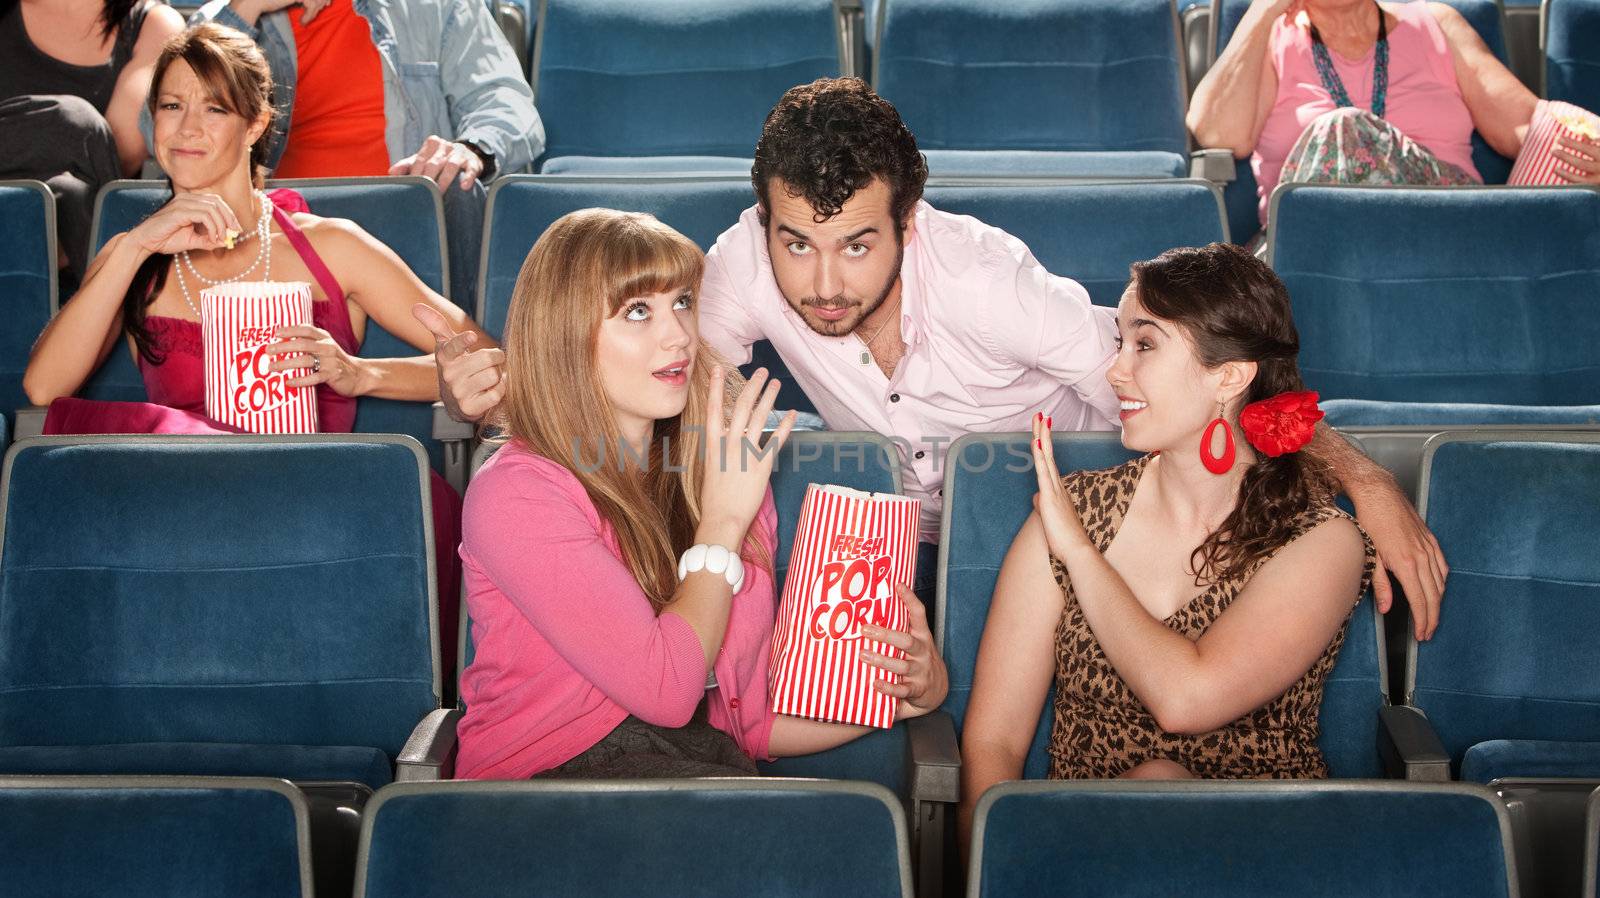 Flirtacious man with 2 young women in theater